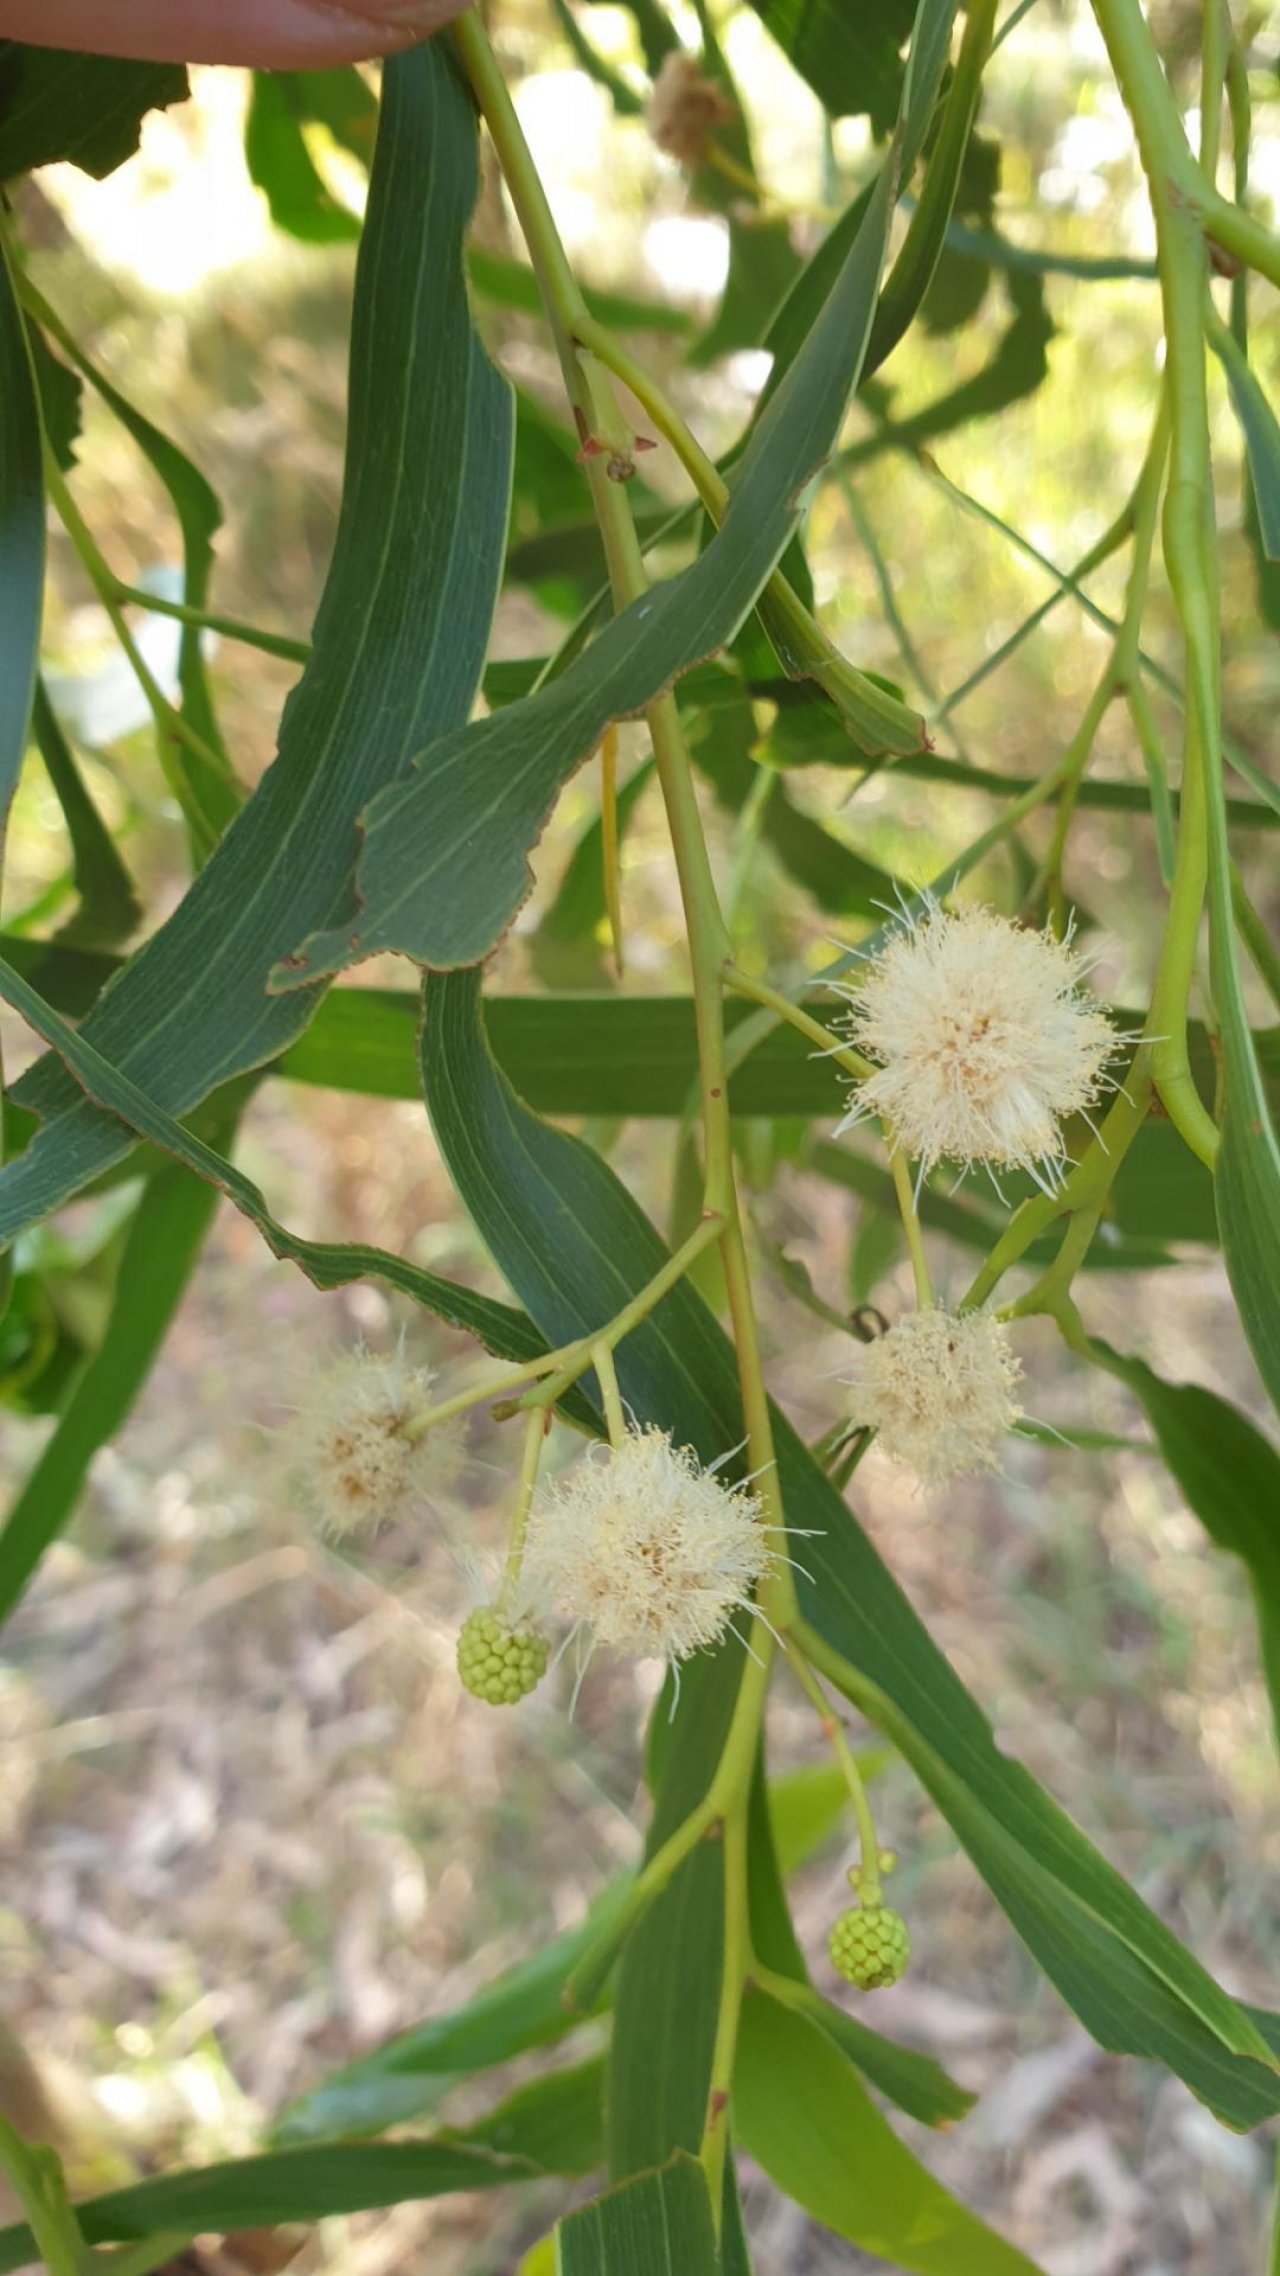 Golden Wattle in ClimateWatch App spotted by Jessica Walker on 24.01.2021